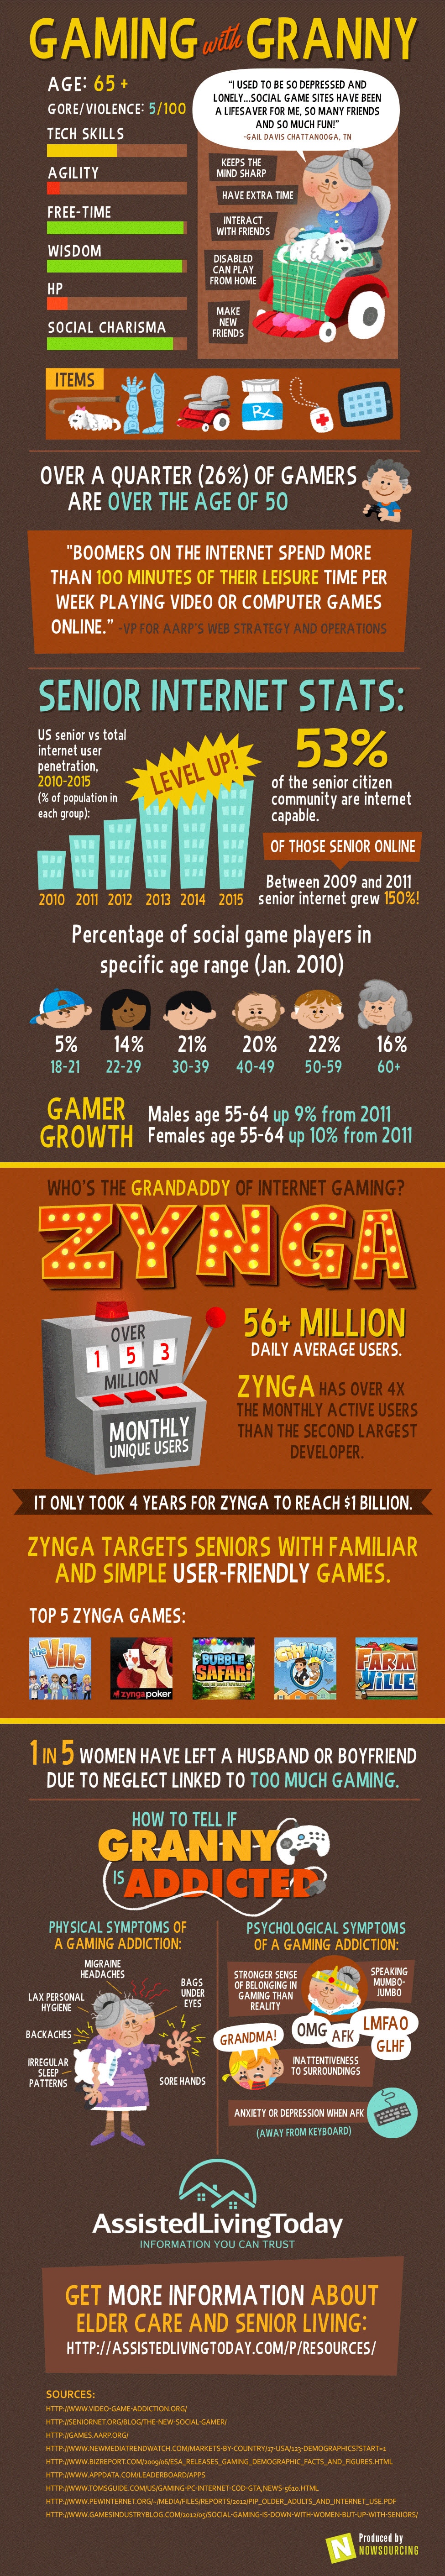 Granny Game Activities Soar In New Study [Infographic]